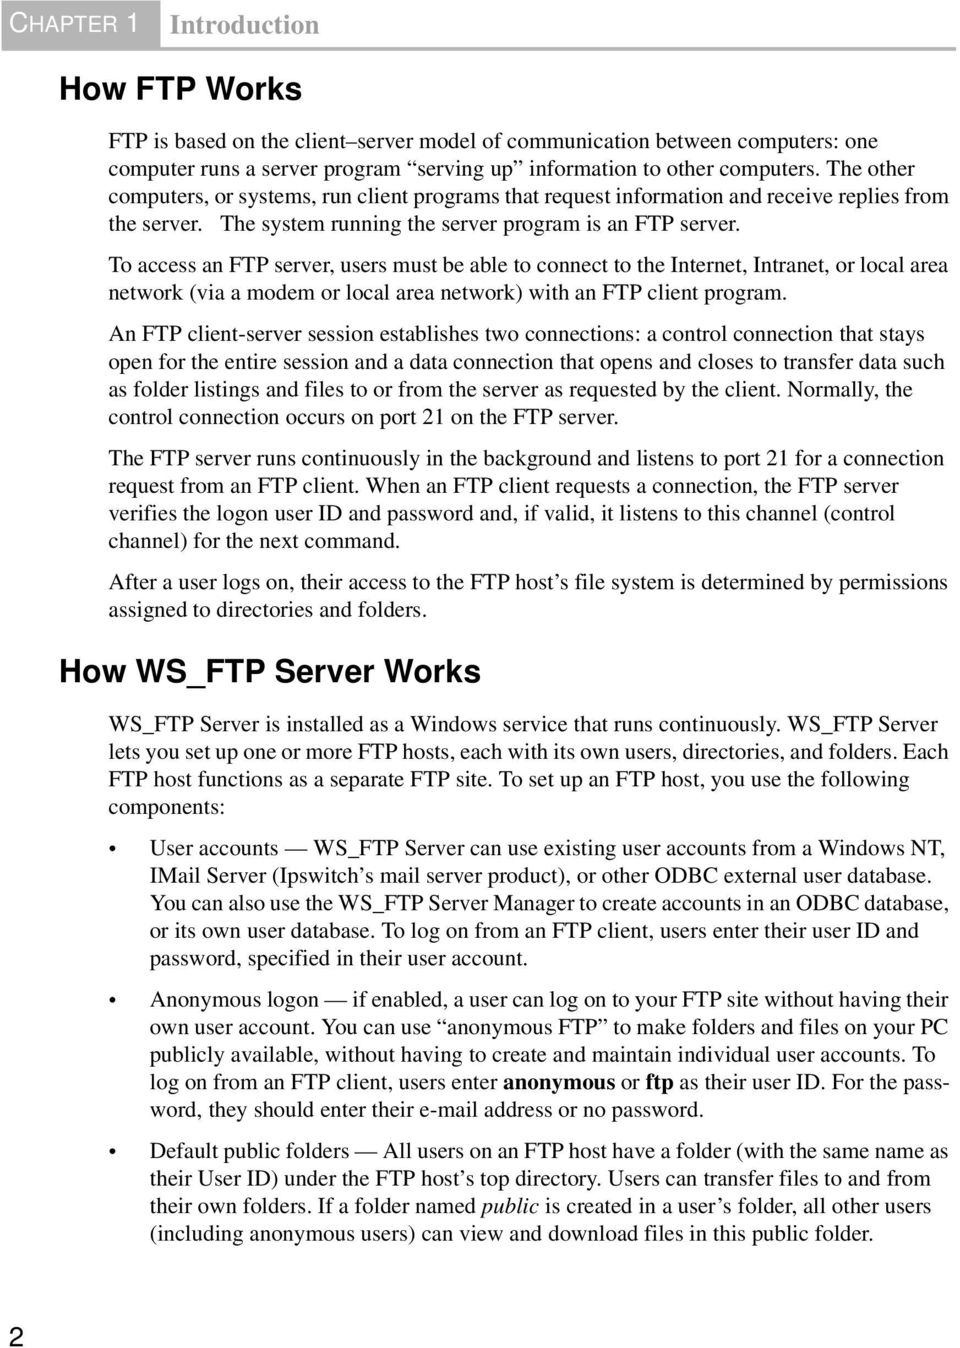 To access an FTP server, users must be able to connect to the Internet, Intranet, or local area network (via a modem or local area network) with an FTP client program.